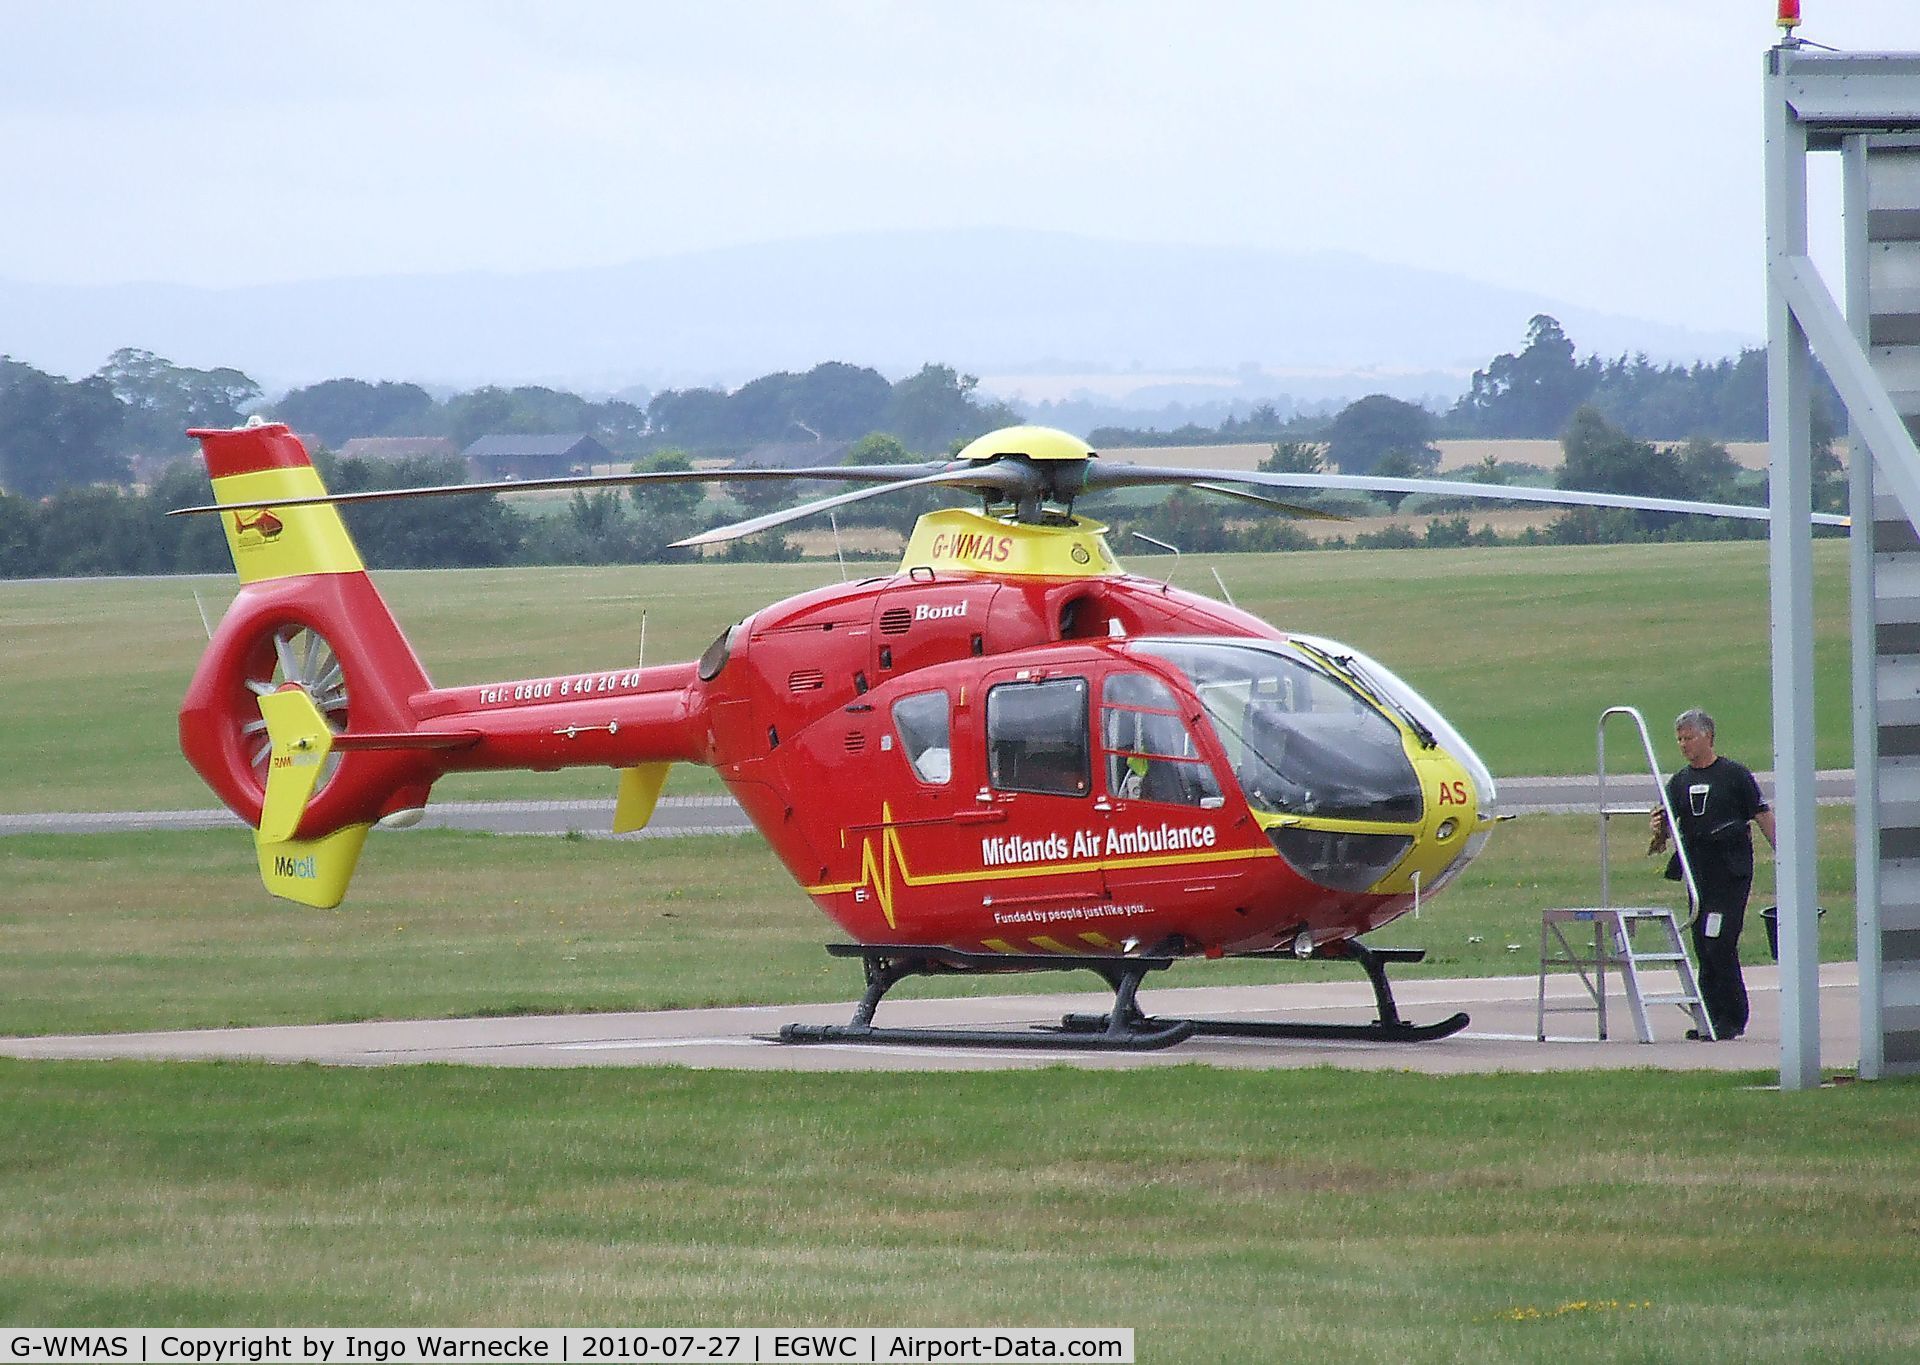 G-WMAS, 2001 Eurocopter EC-135T-2 C/N 0174, Eurocopter EC135T2 EMS-helicopter of Midlands Air Ambulance at Cosford airfield